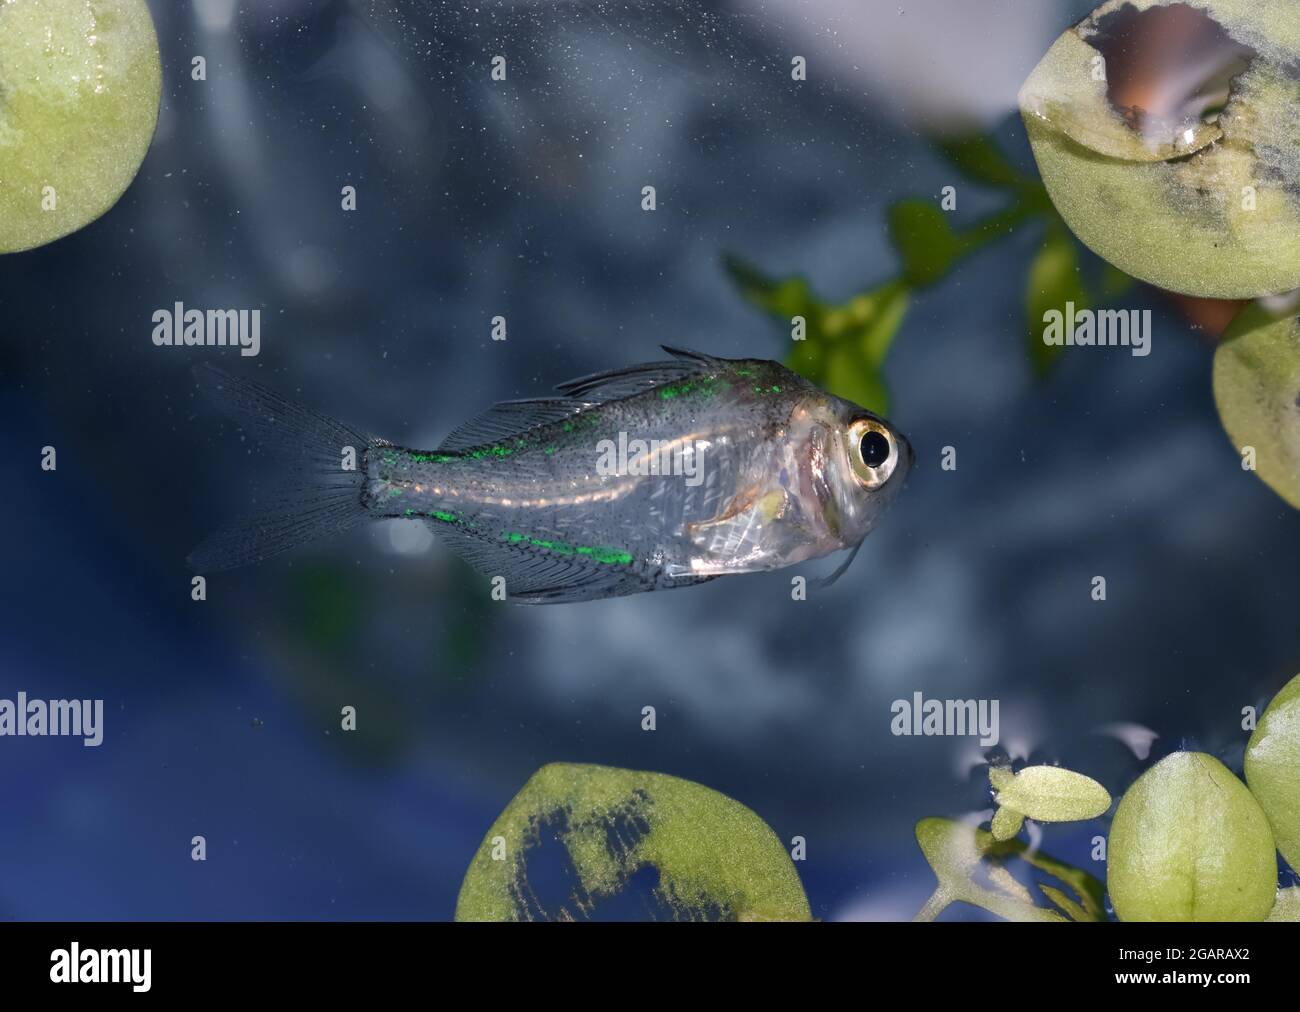 Indian painted glass fish died due to bent spine disease. Dead Small fish on the surface of water. Stock Photo